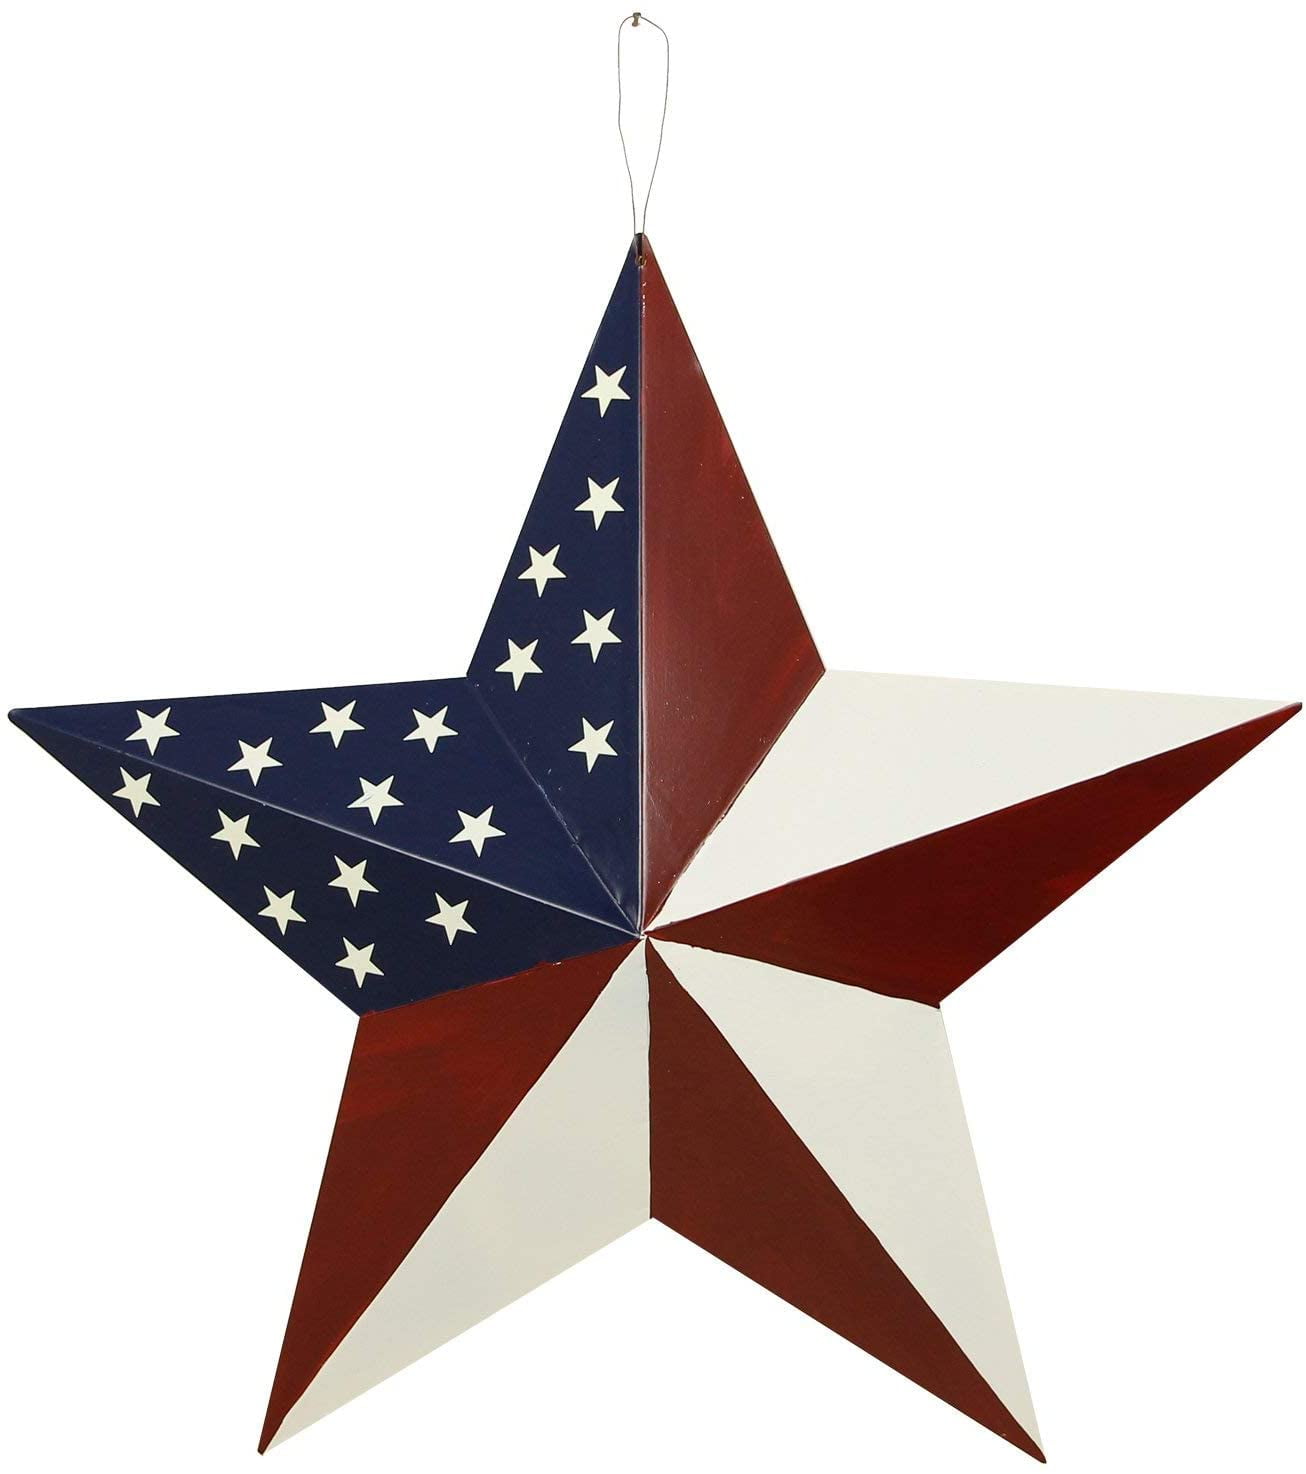 Rustic STAR Sign Metal Shop Home decoration Ornament amish Barn wall shabby chic 